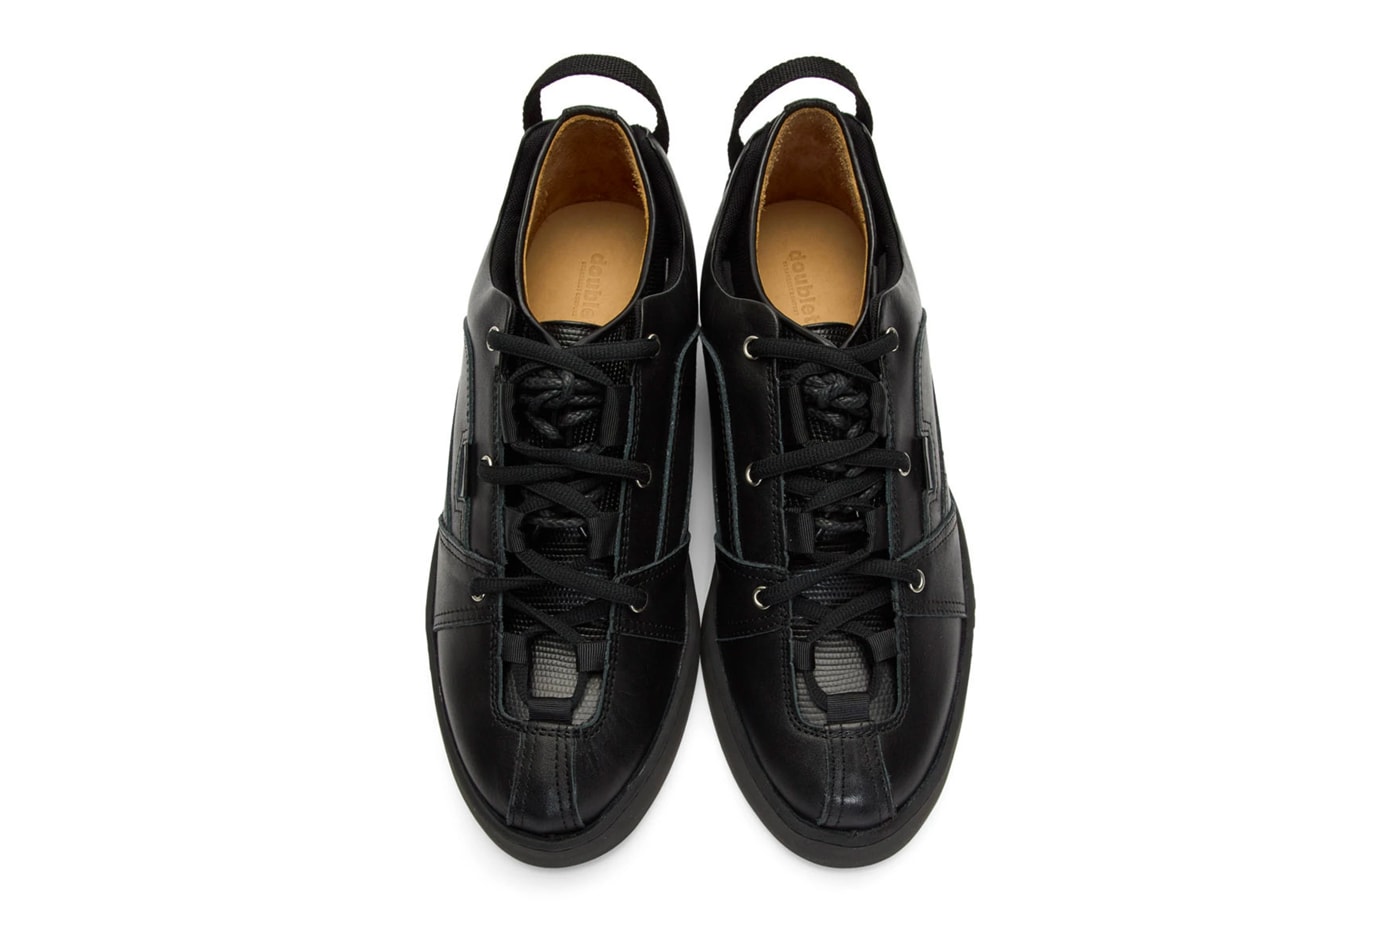 DOUBLET Black Sneakers Layered Dress Derbys two in one hybrid lizzard leather derby interface detachable shoes footwear sneakers trainers